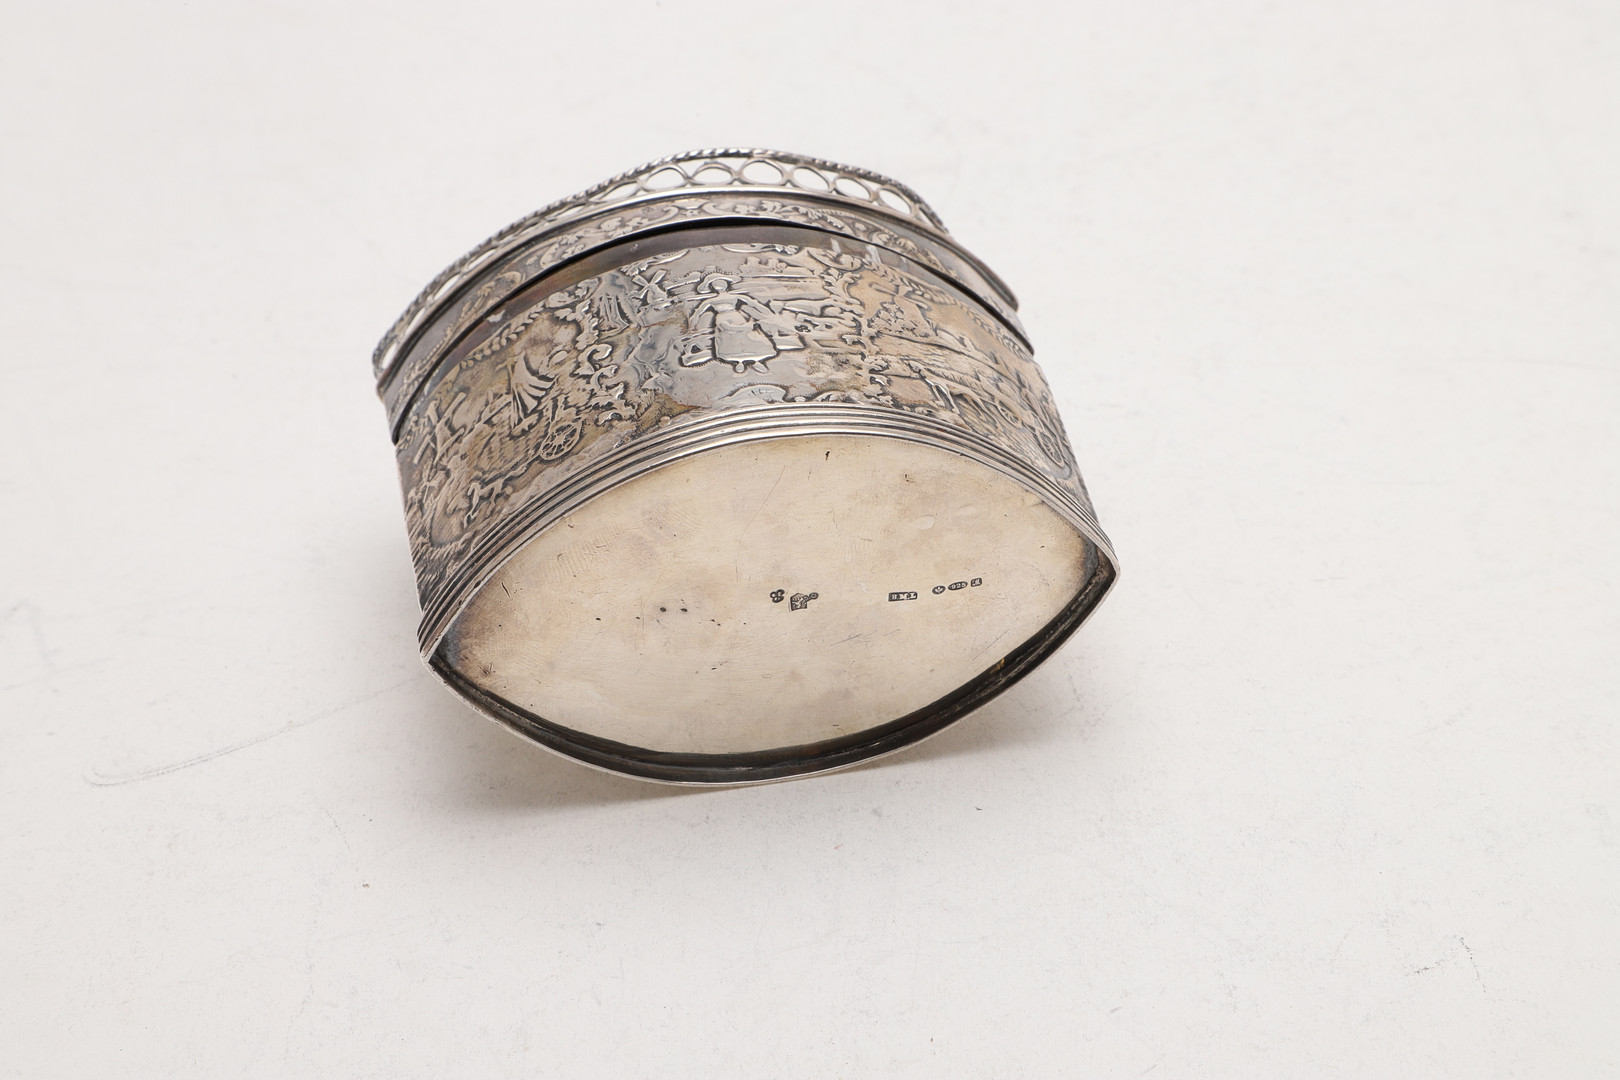 A LATE 19TH/ EARLY 20TH CENTURY NAVETTE-SHAPED DUTCH TEA CADDY. - Image 6 of 6